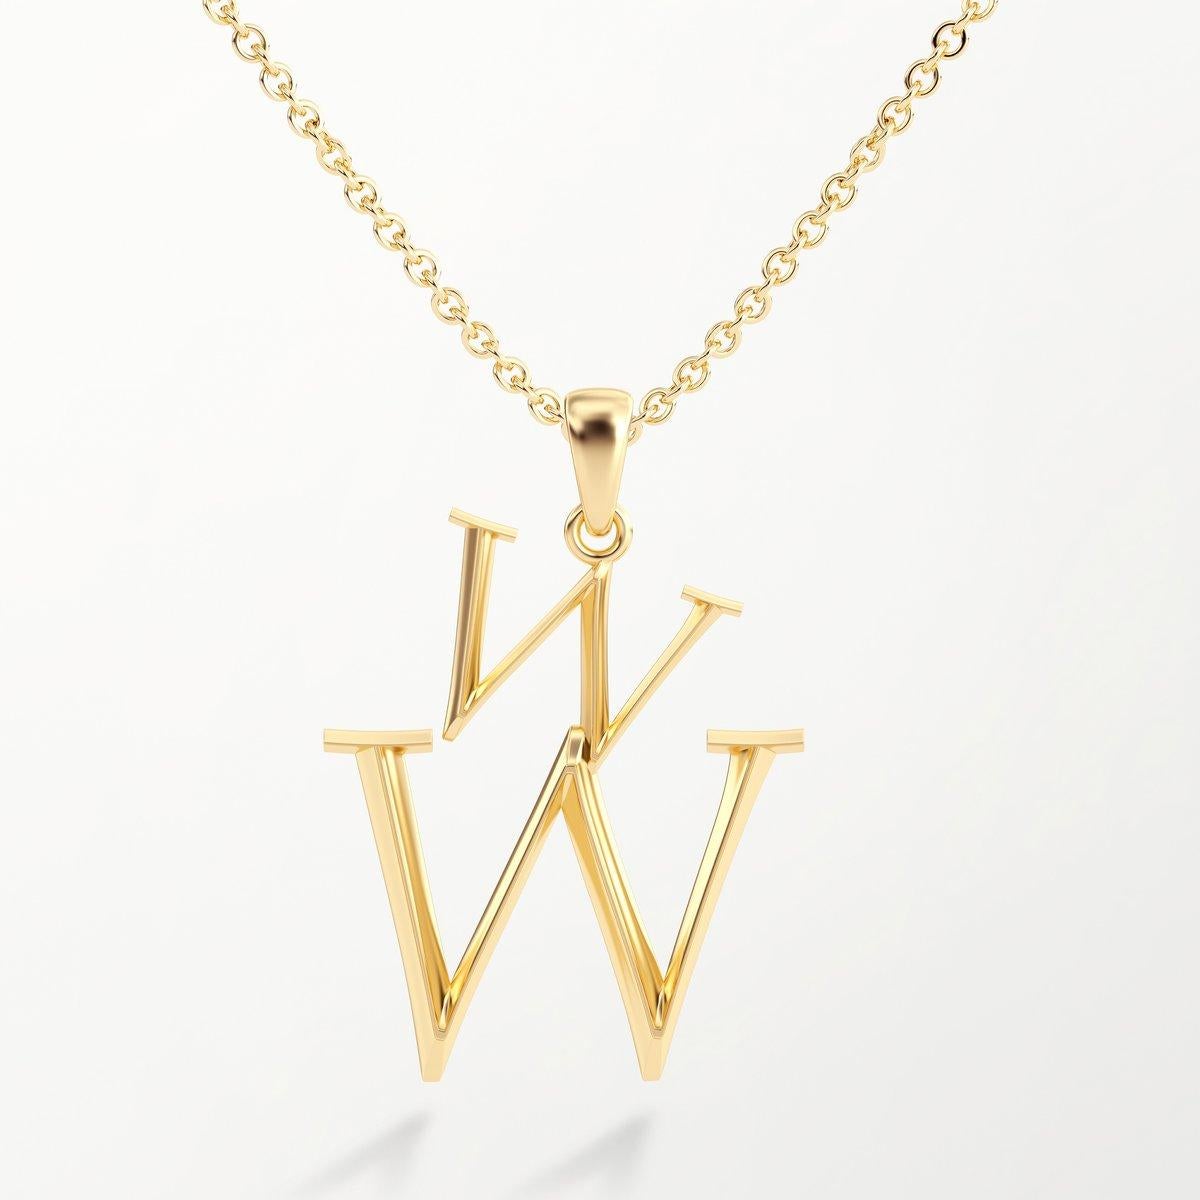 Contemporary Medium Initial Pendant Necklace in 18k Yellow, White or Rose Gold 19